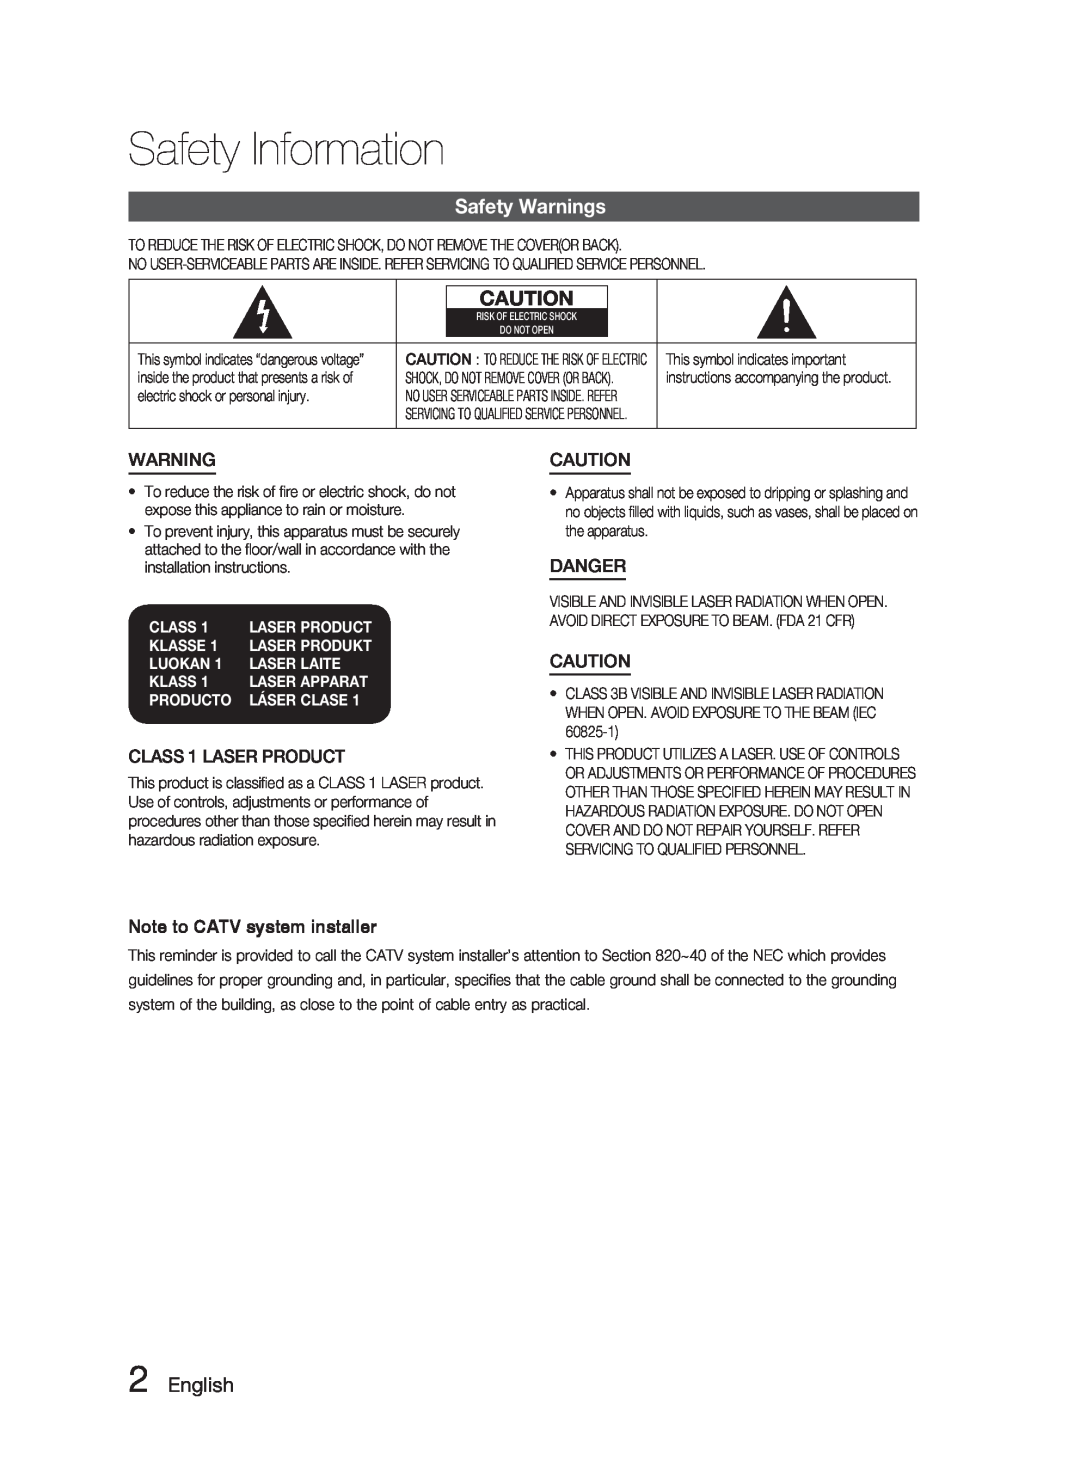 Samsung AH68-02259Q Safety Information, Safety Warnings, English, Note to CATV system installer, Class, Klasse, Luokan 